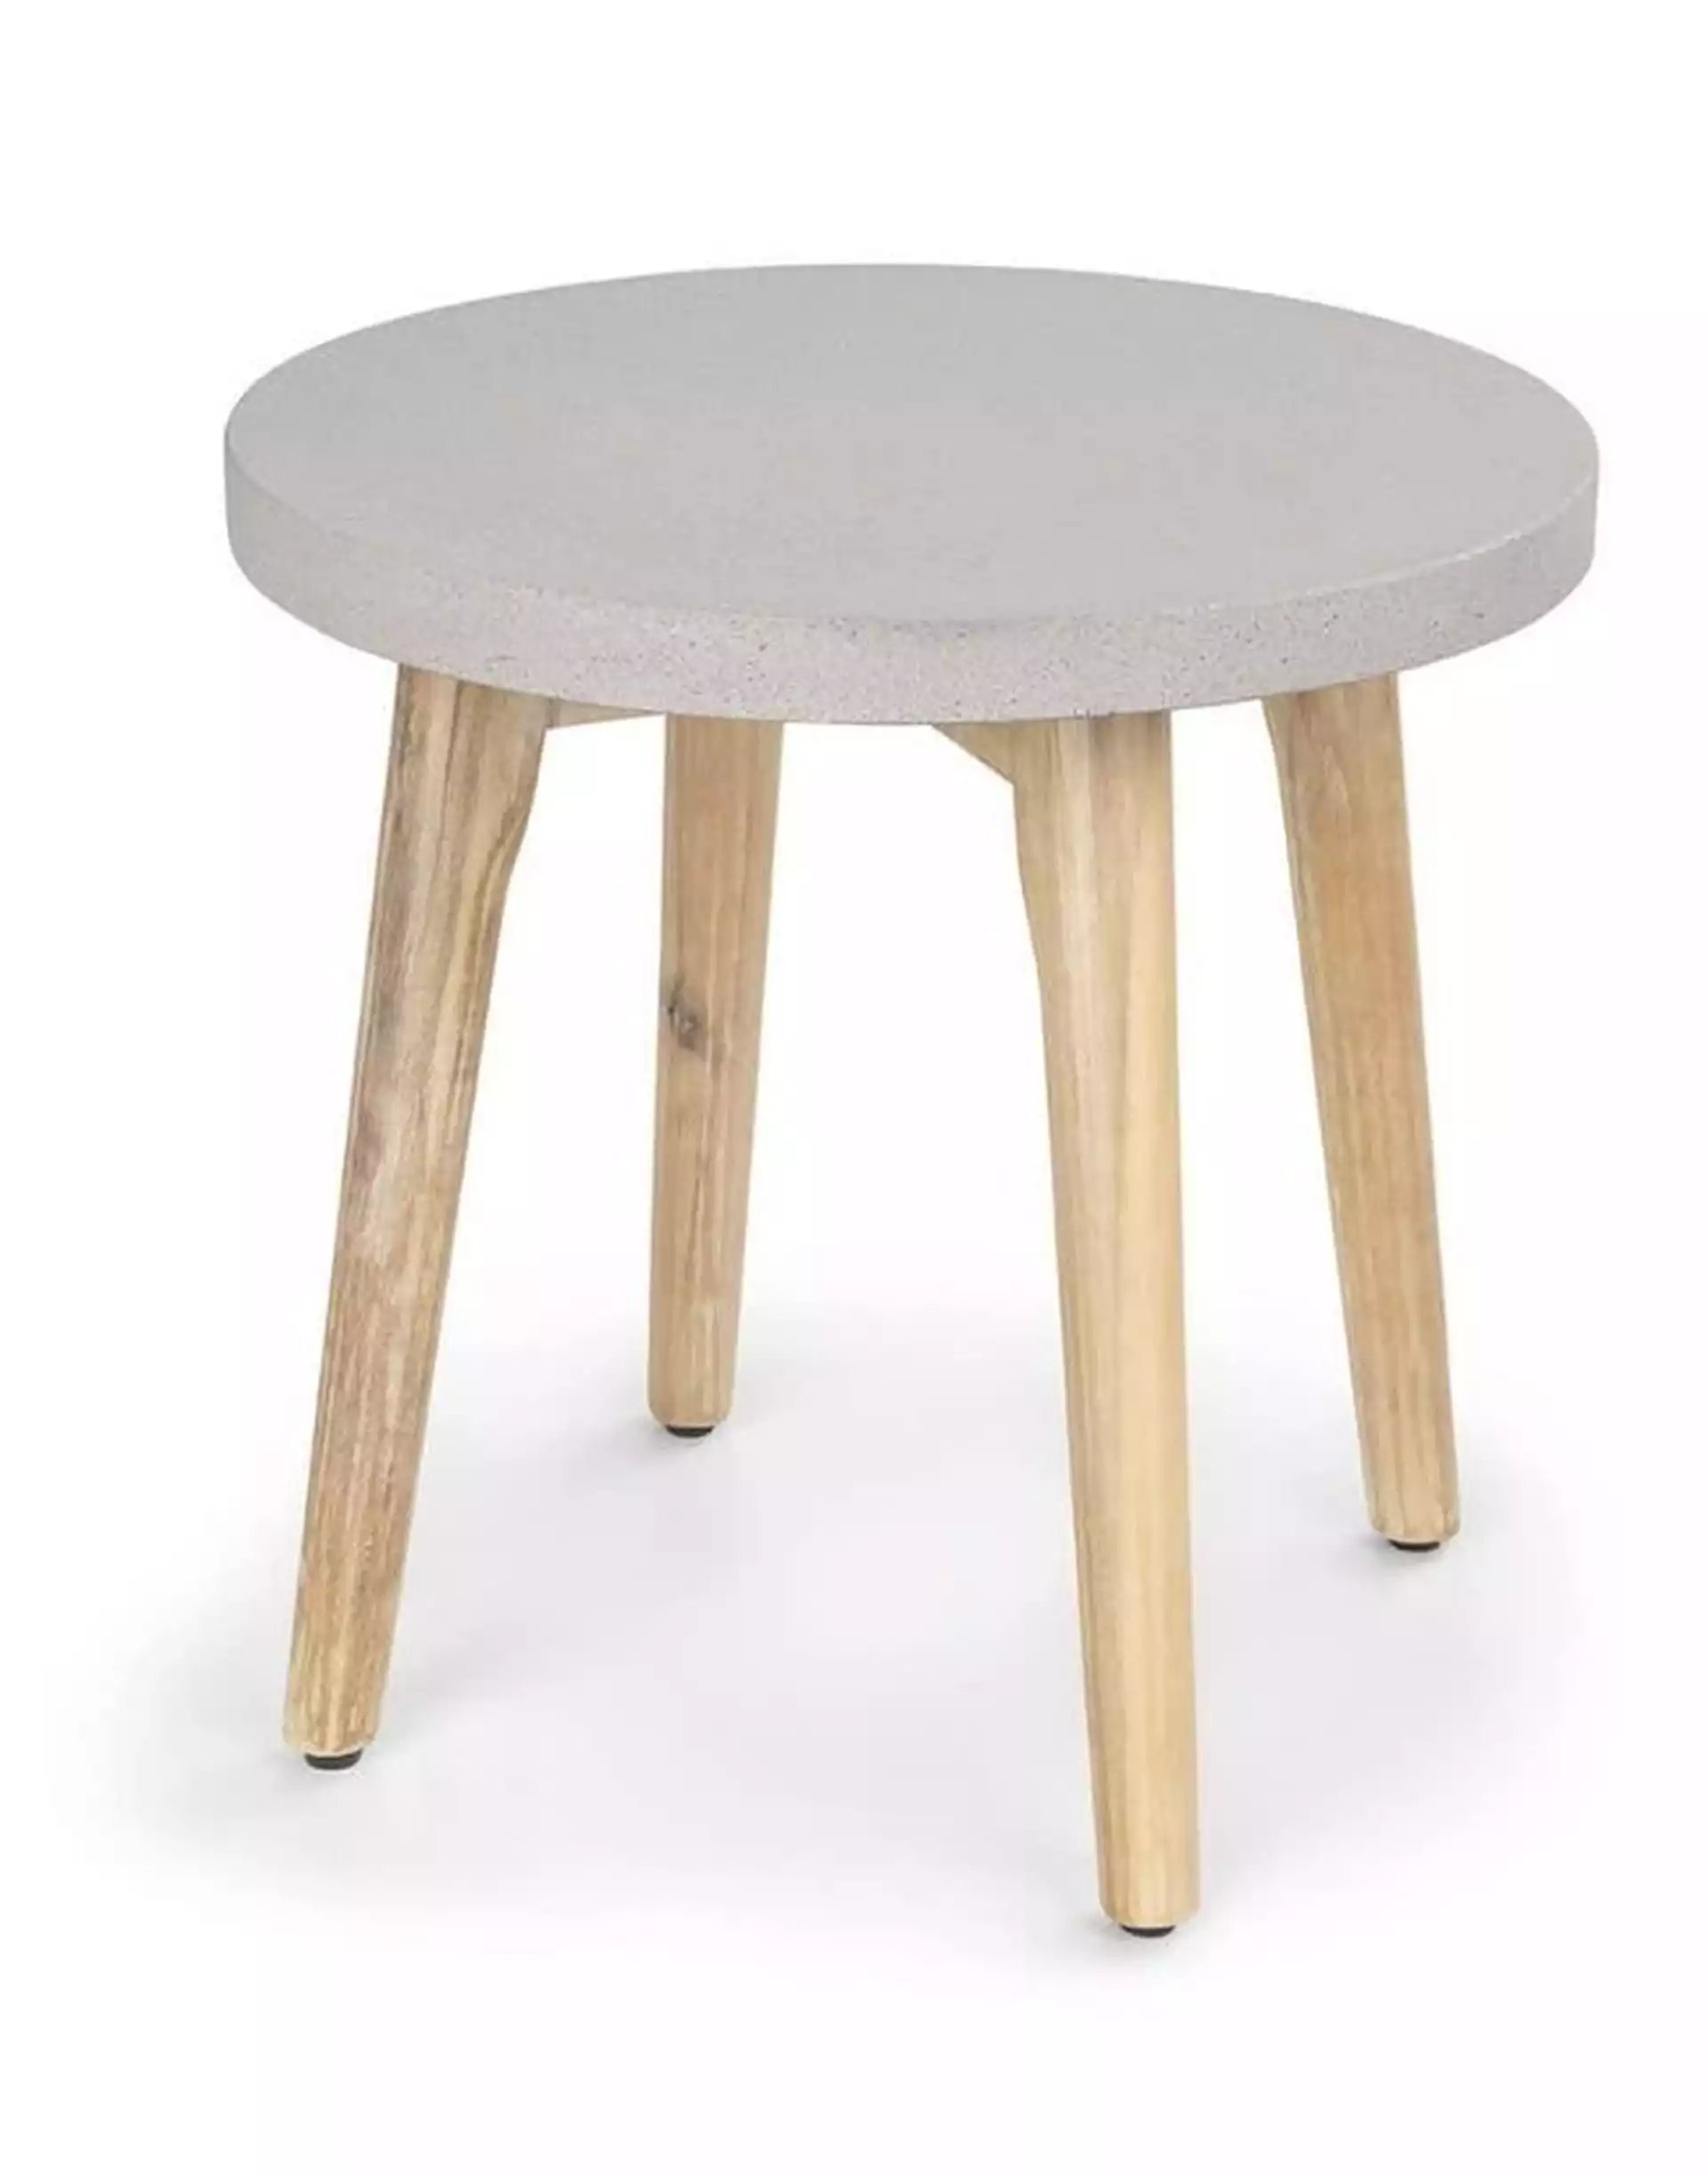 Atra Concrete Round Side Table - Article